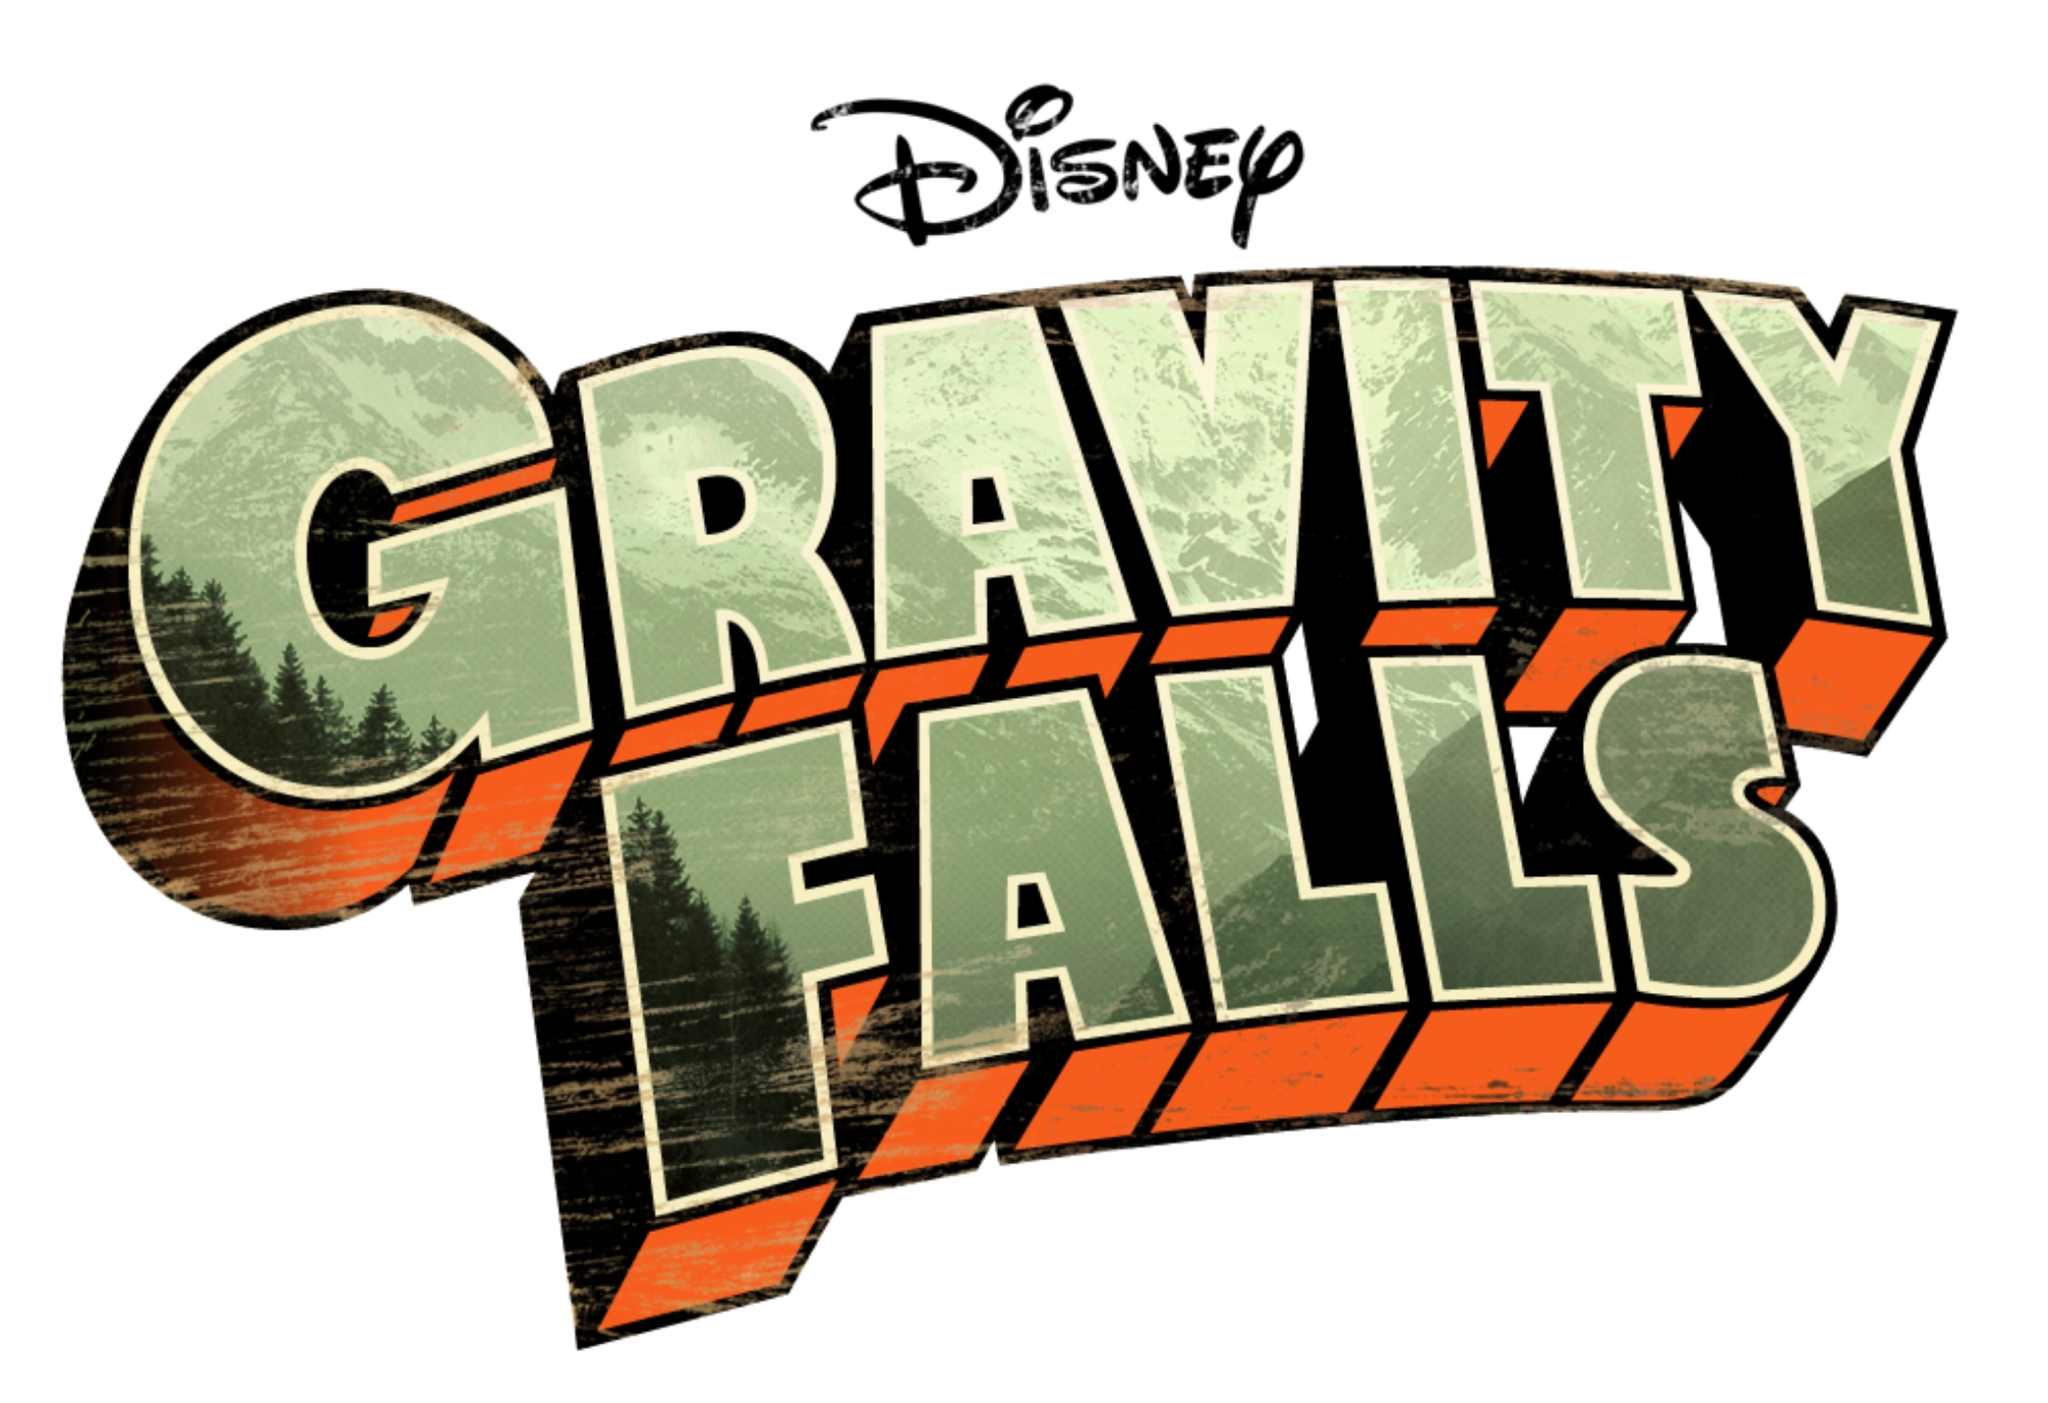 Gravity Falls is back on Disney Channel and Disney XD!